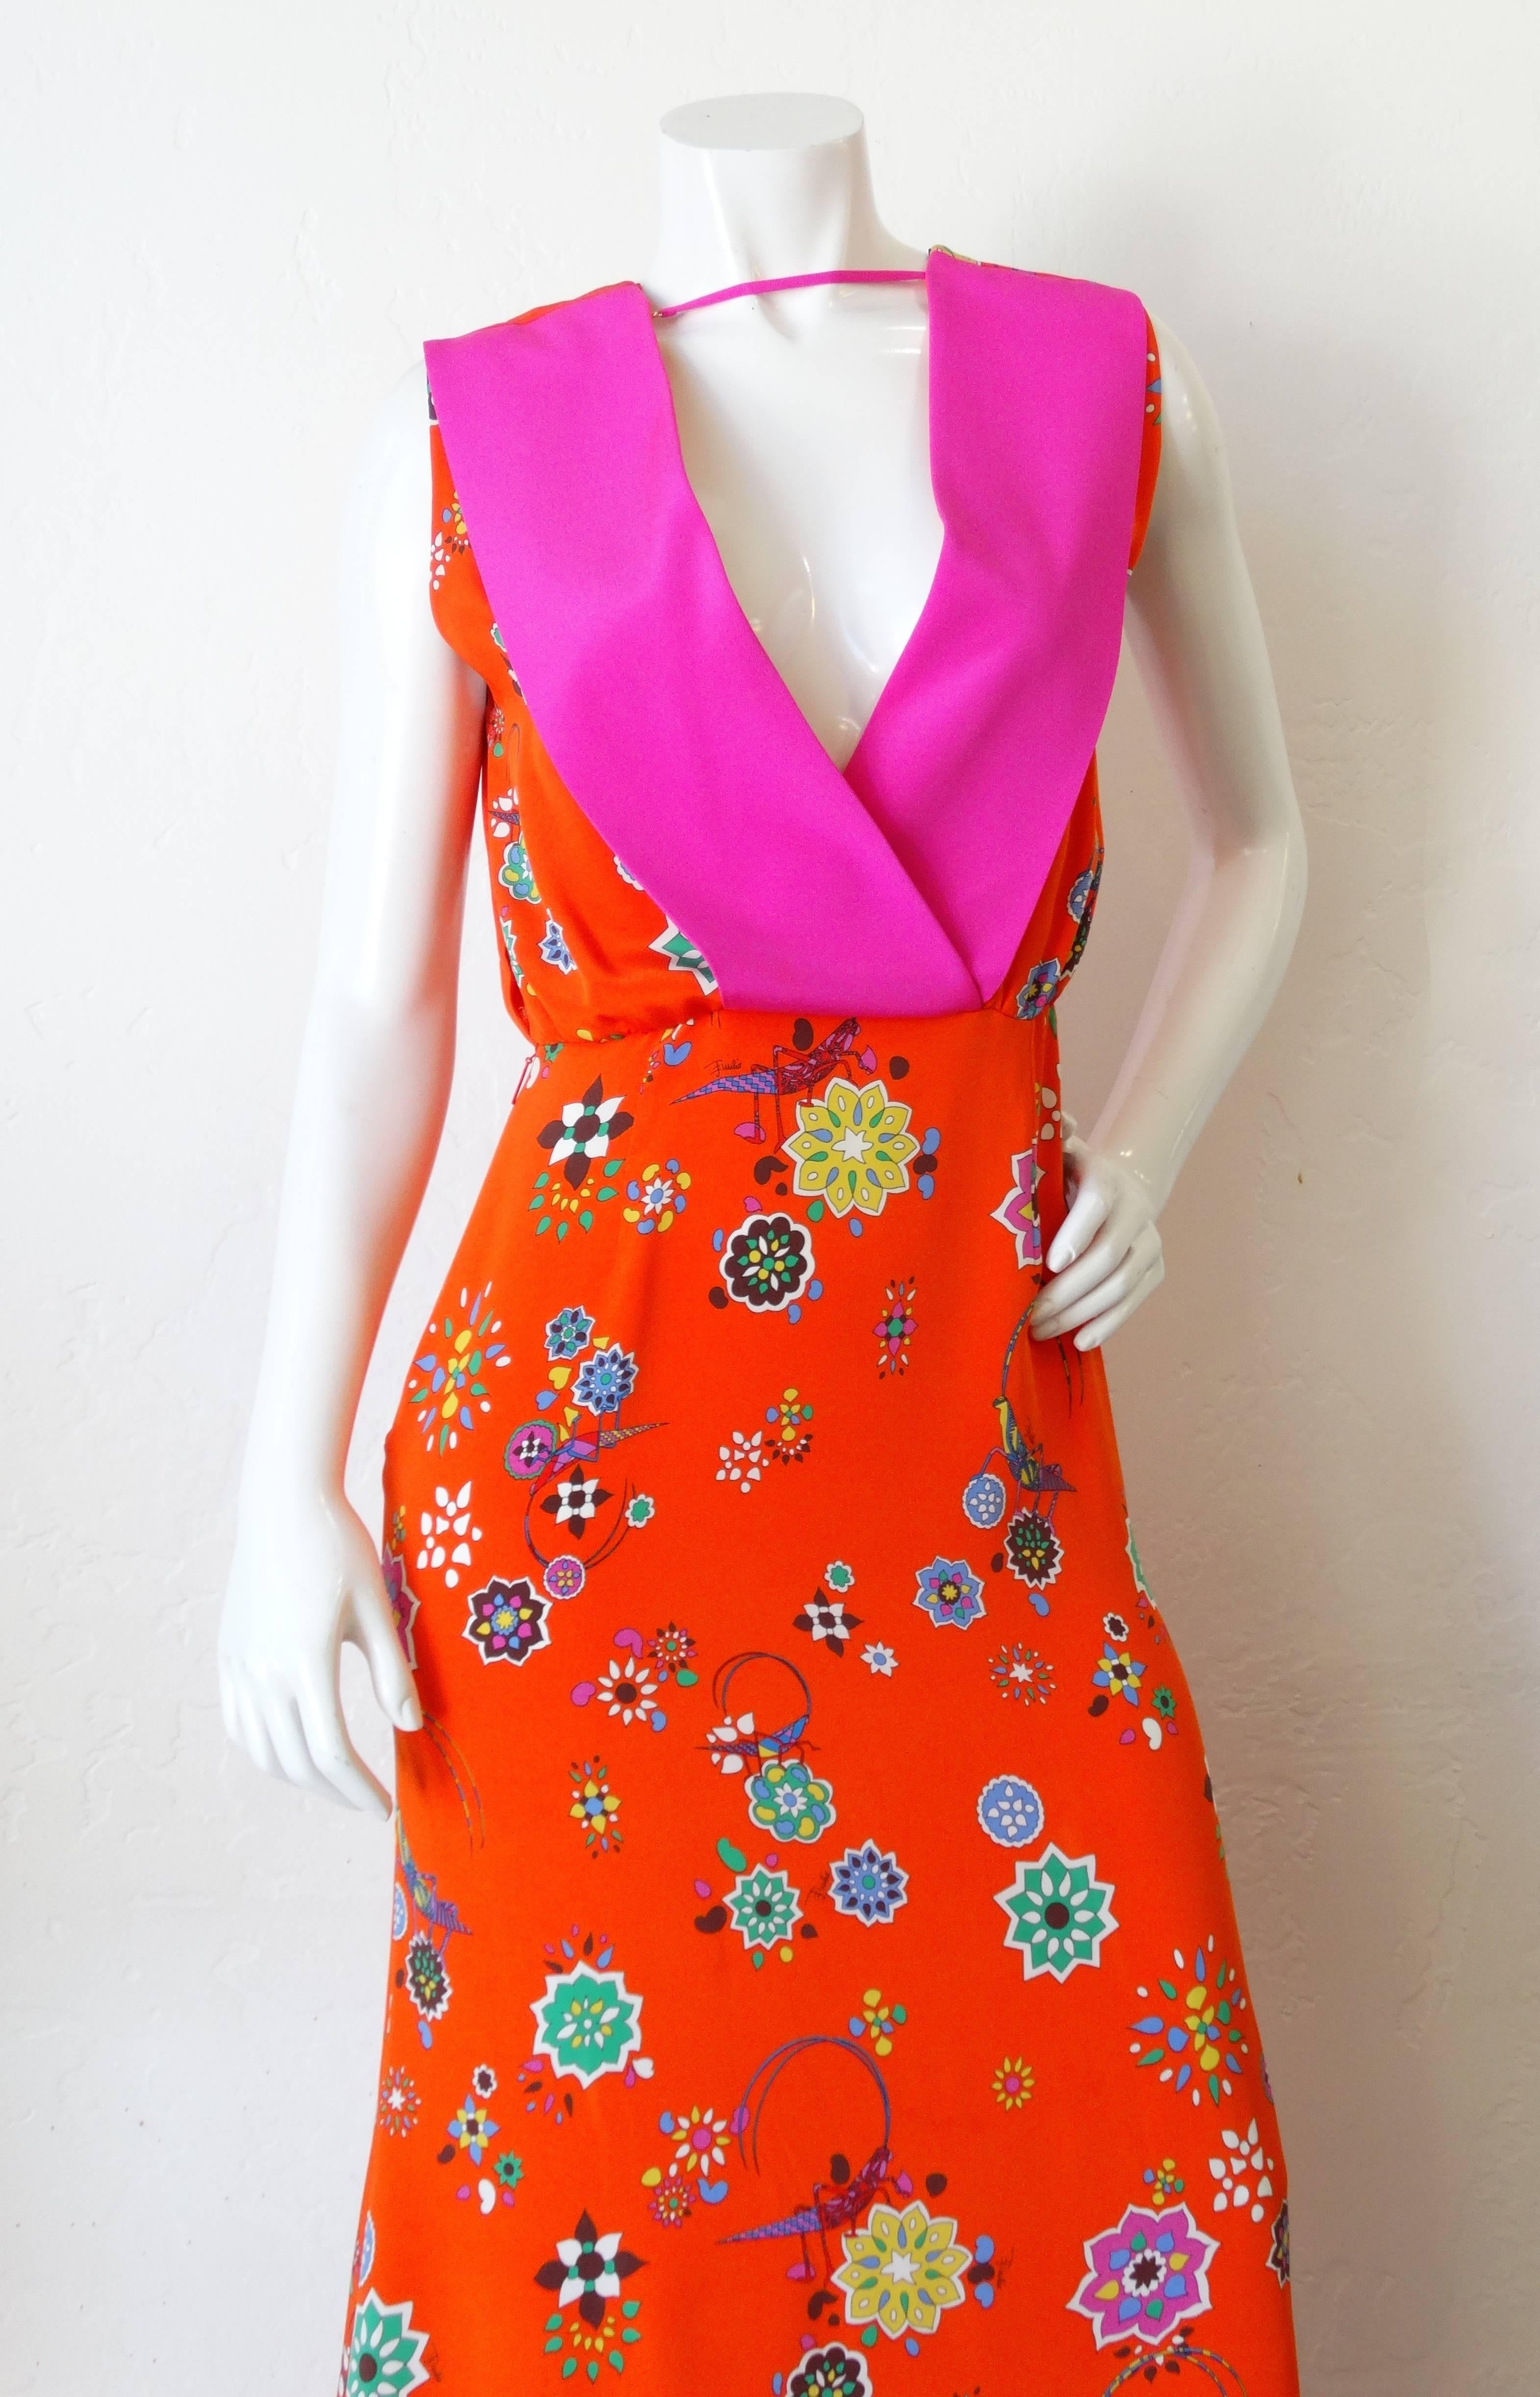 Incredible 21st century Emilio Pucci printed dress! Gorgeous orange floral print with precious grasshopper motifs throughout in multicolor shades . Hot pink collar with a matching ribbon that snaps across the neck. V-neck cut front and back, dress